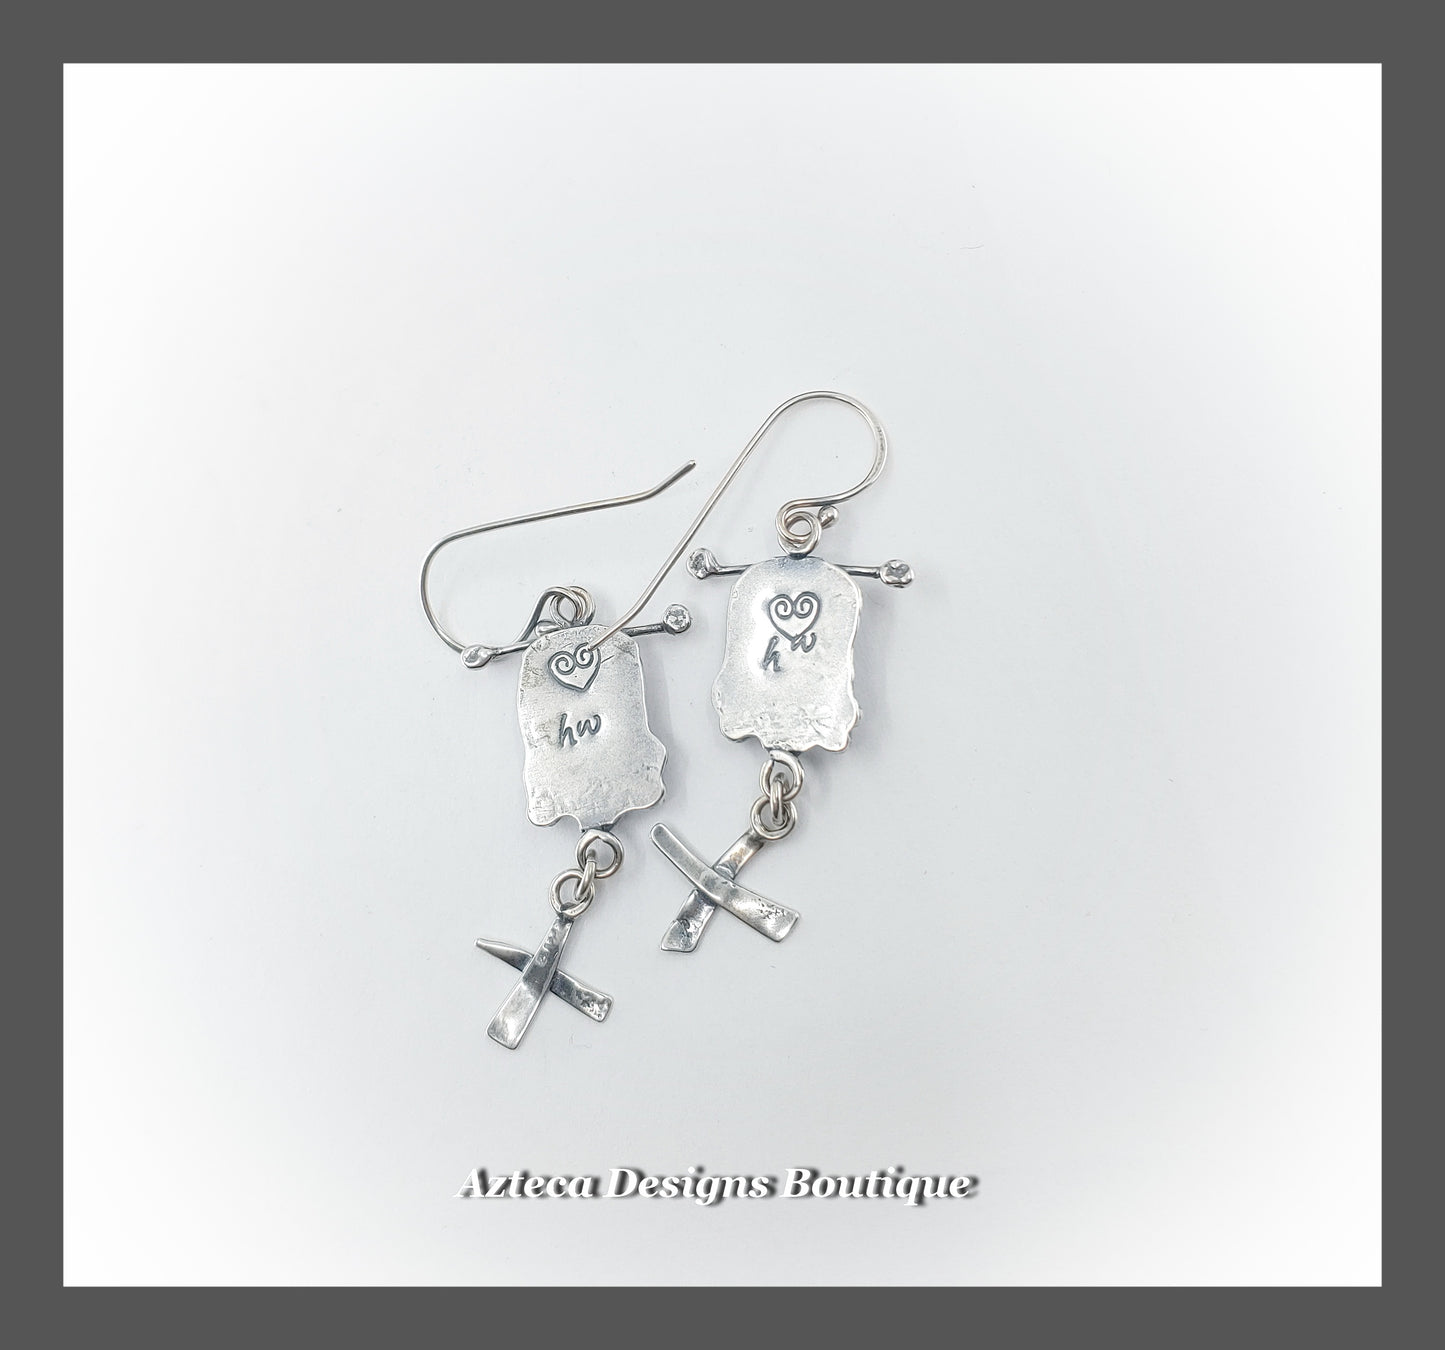 Ancient Tales Told + Mint Green Kyanite Hand Fabricated Argentium Silver Shield Cross Earrings